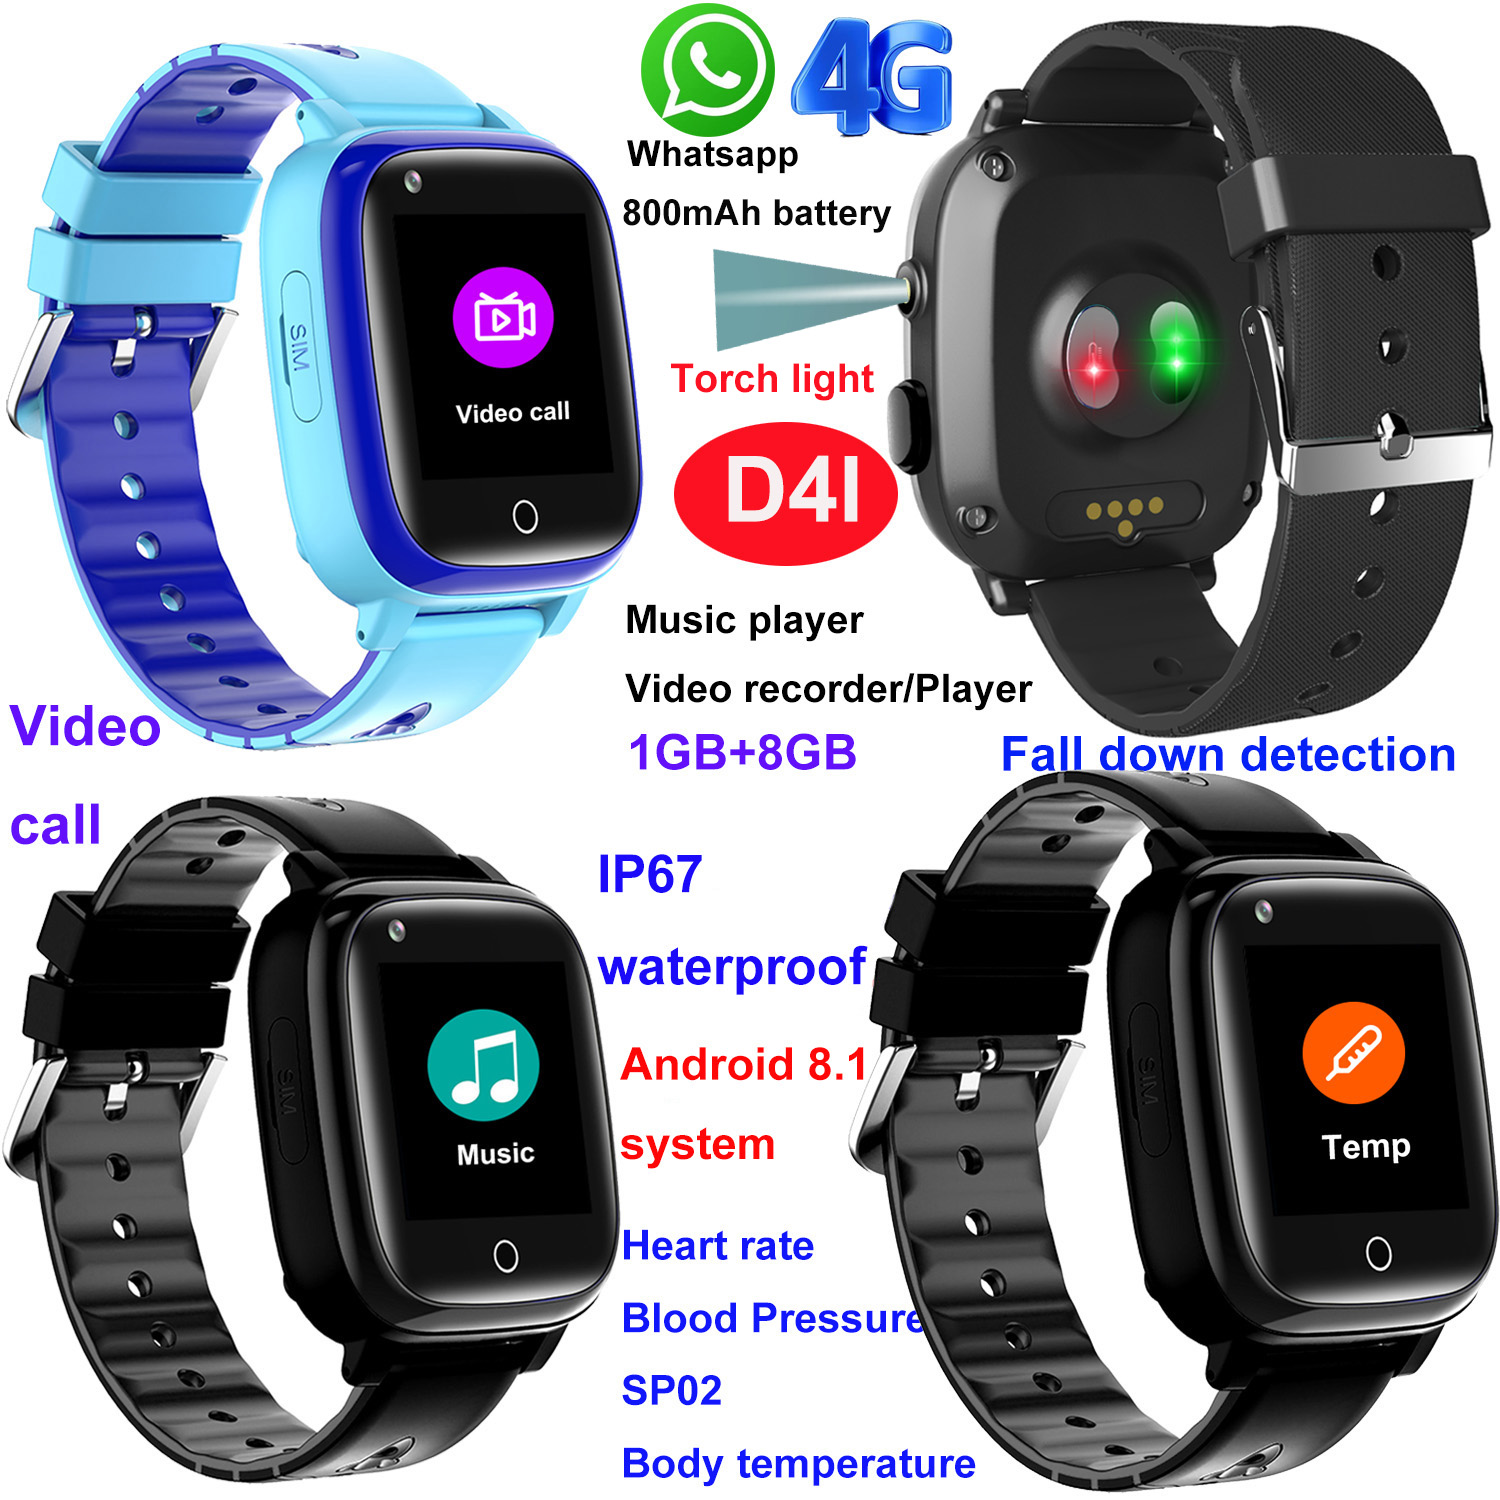 LTE Video call IP67 Waterproof Thermometer Smart Watch GPS Tracker D4l 